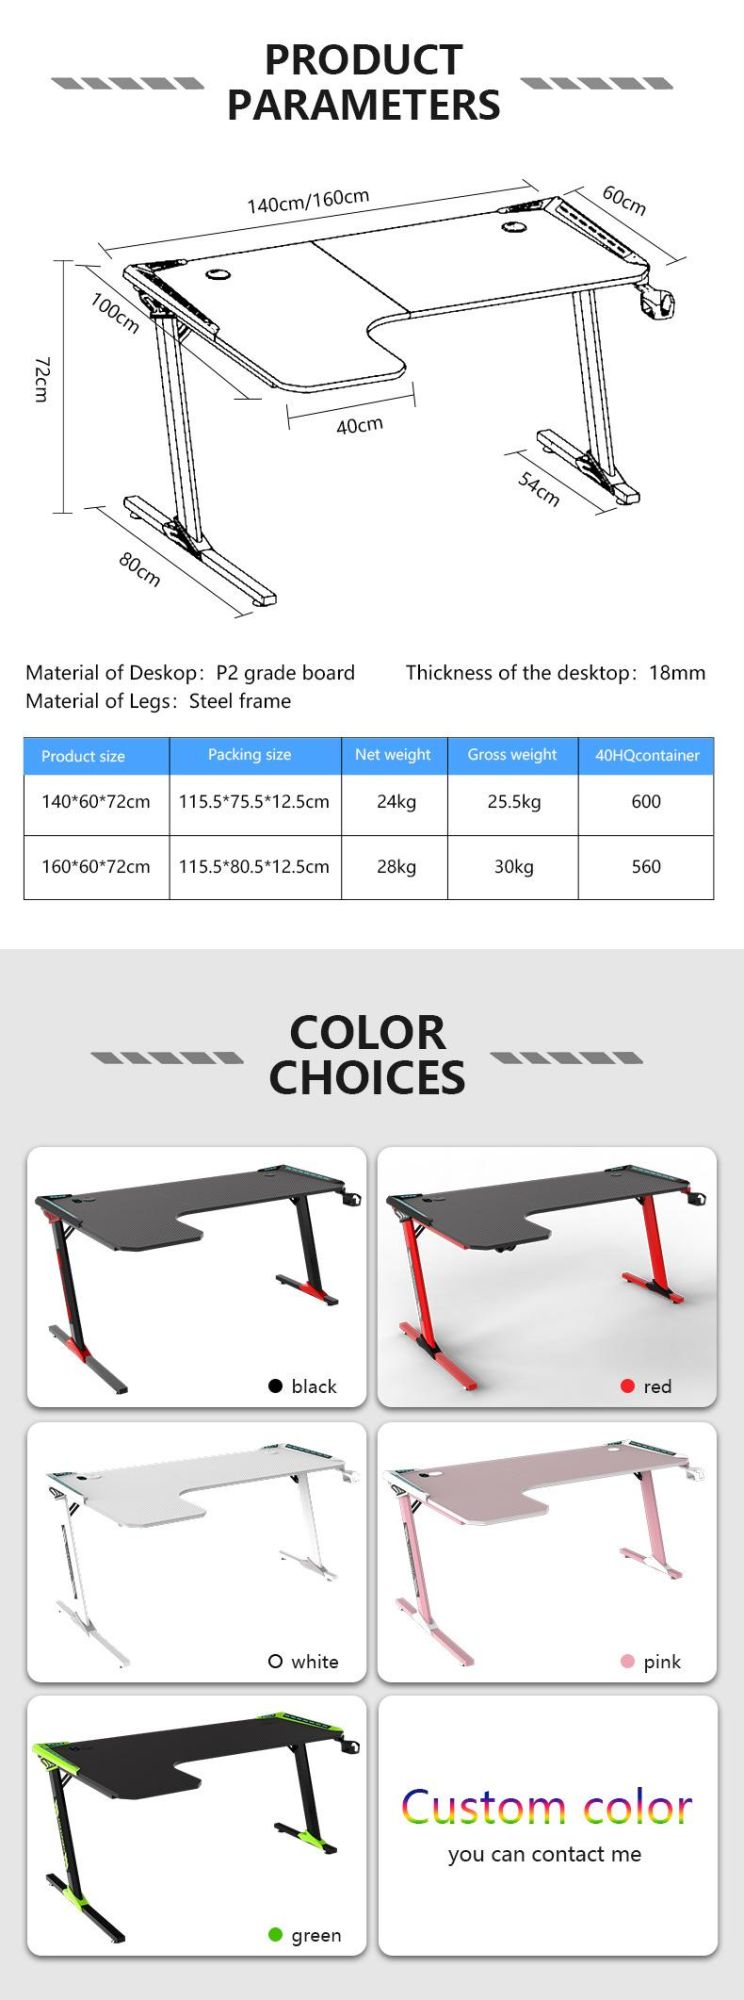 Aor Esports Customizes Furniture Bedroom Student Dormitory Desktop RGB LED Light Laptop Study Computer Table Gamer Competitive Chair Gaming Desk for Home Office